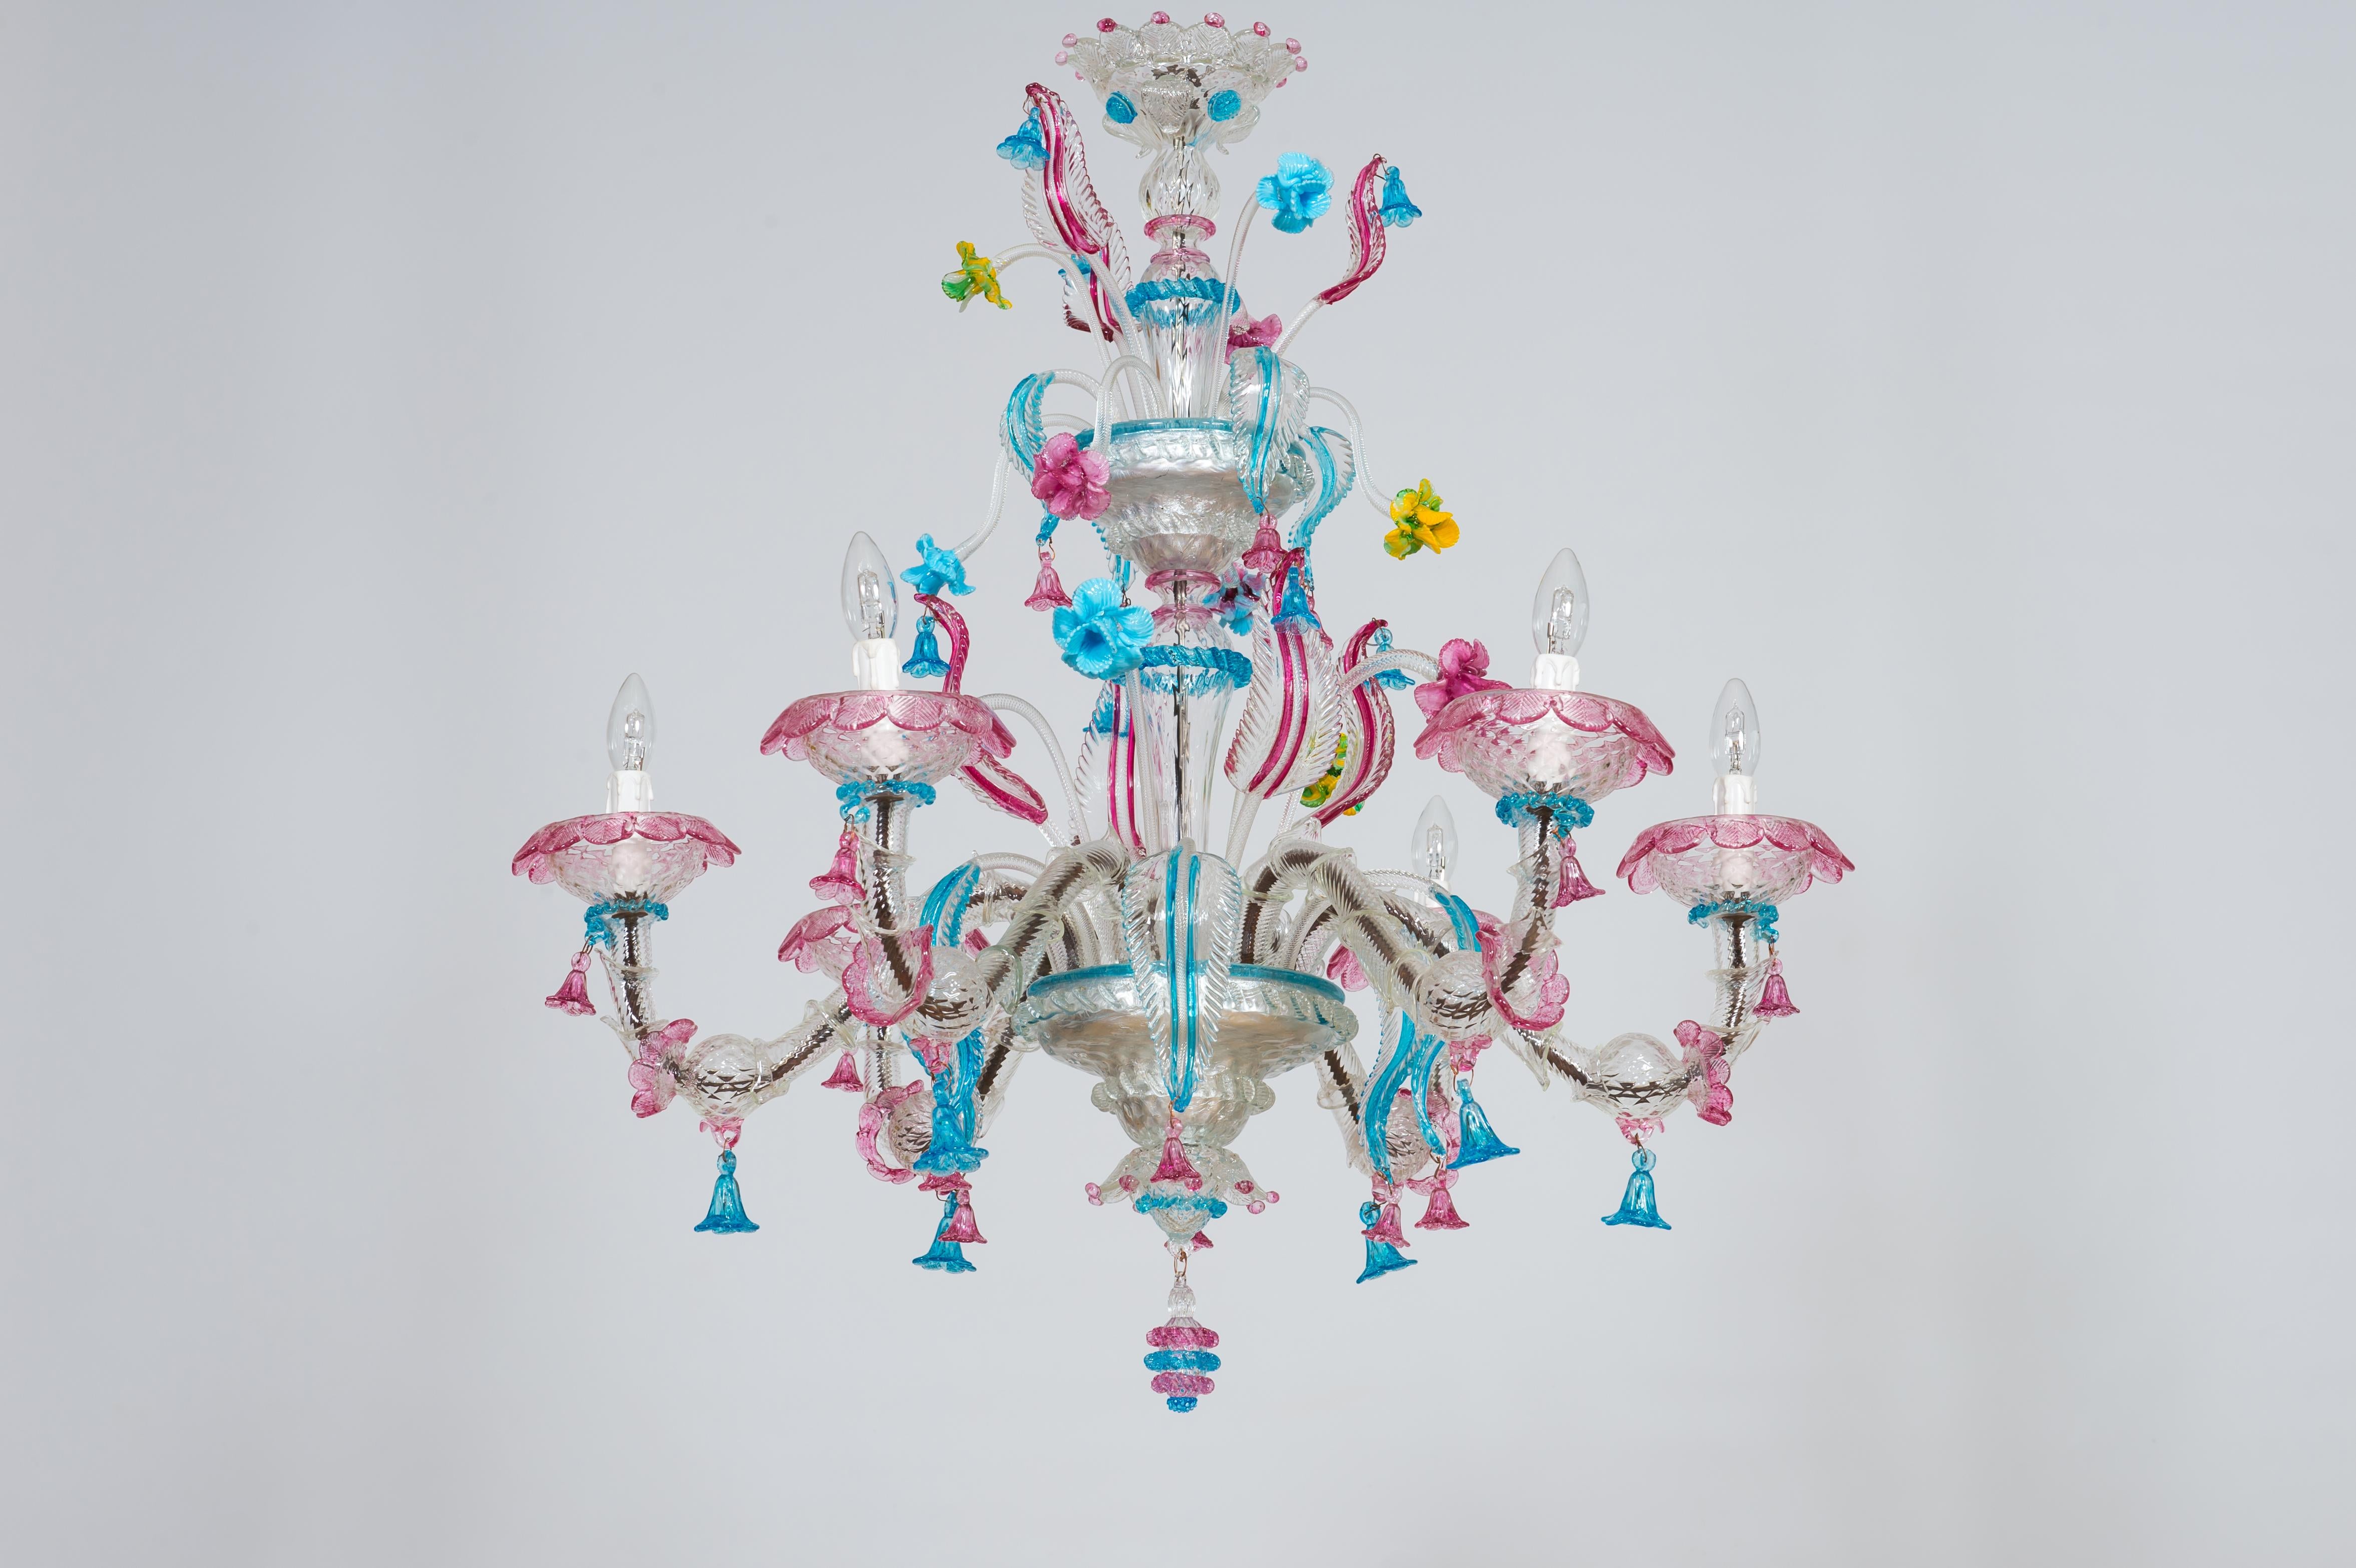 Rezzonico floral chandelier made of multicolored murano glass contemporary 2000s.
This beautiful chandelier is a unique piece of the most refined Italian and venetian glass art. It is entirely made of blown murano glass, and it was handmade in the